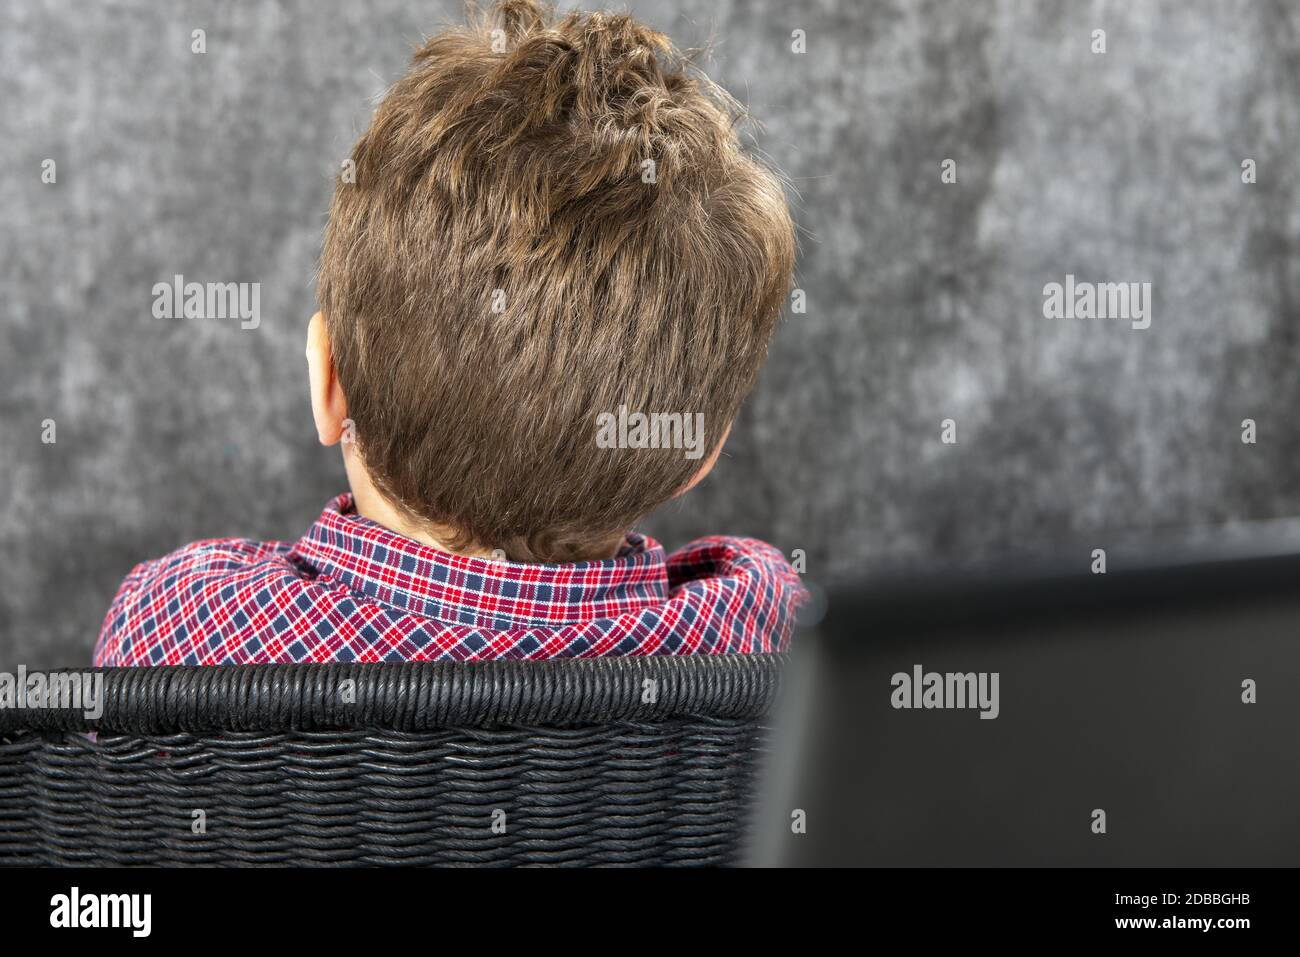 aback view of head of young boy Stock Photo